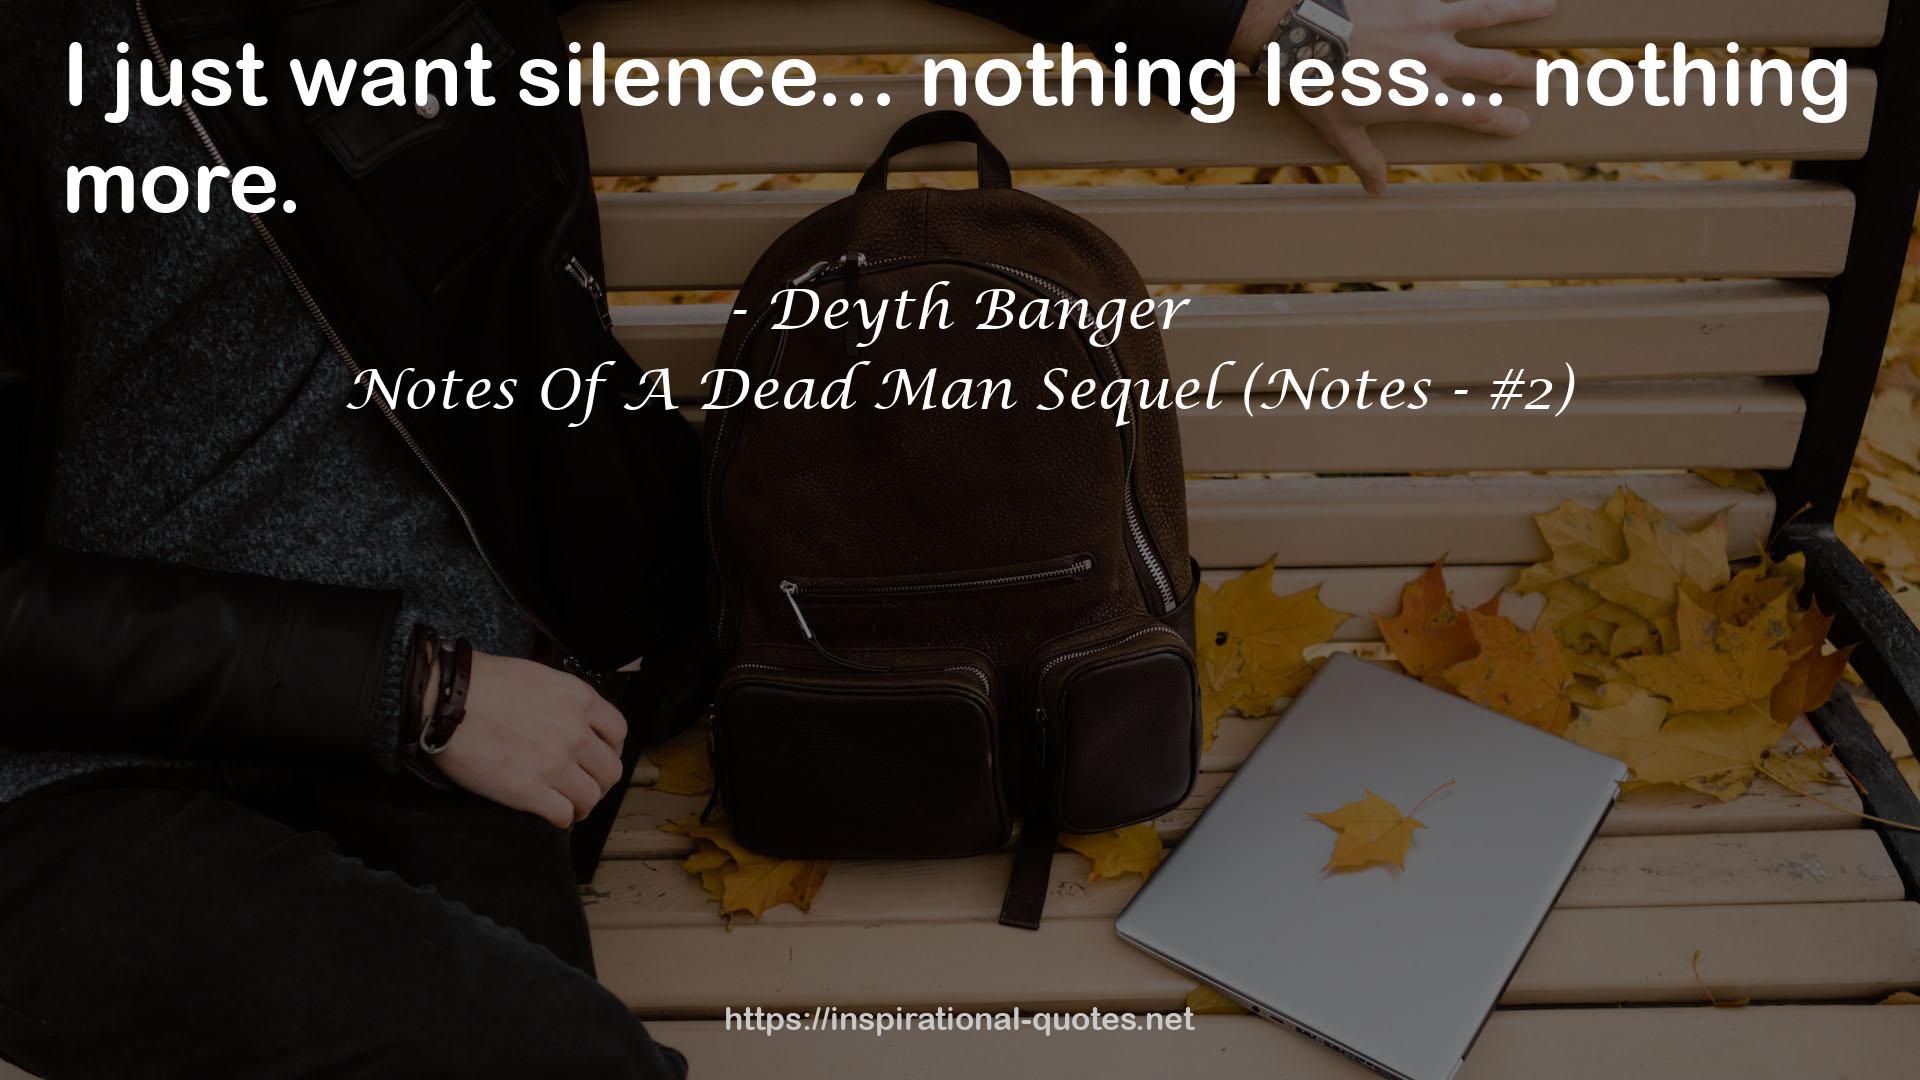 Notes Of A Dead Man Sequel (Notes - #2) QUOTES